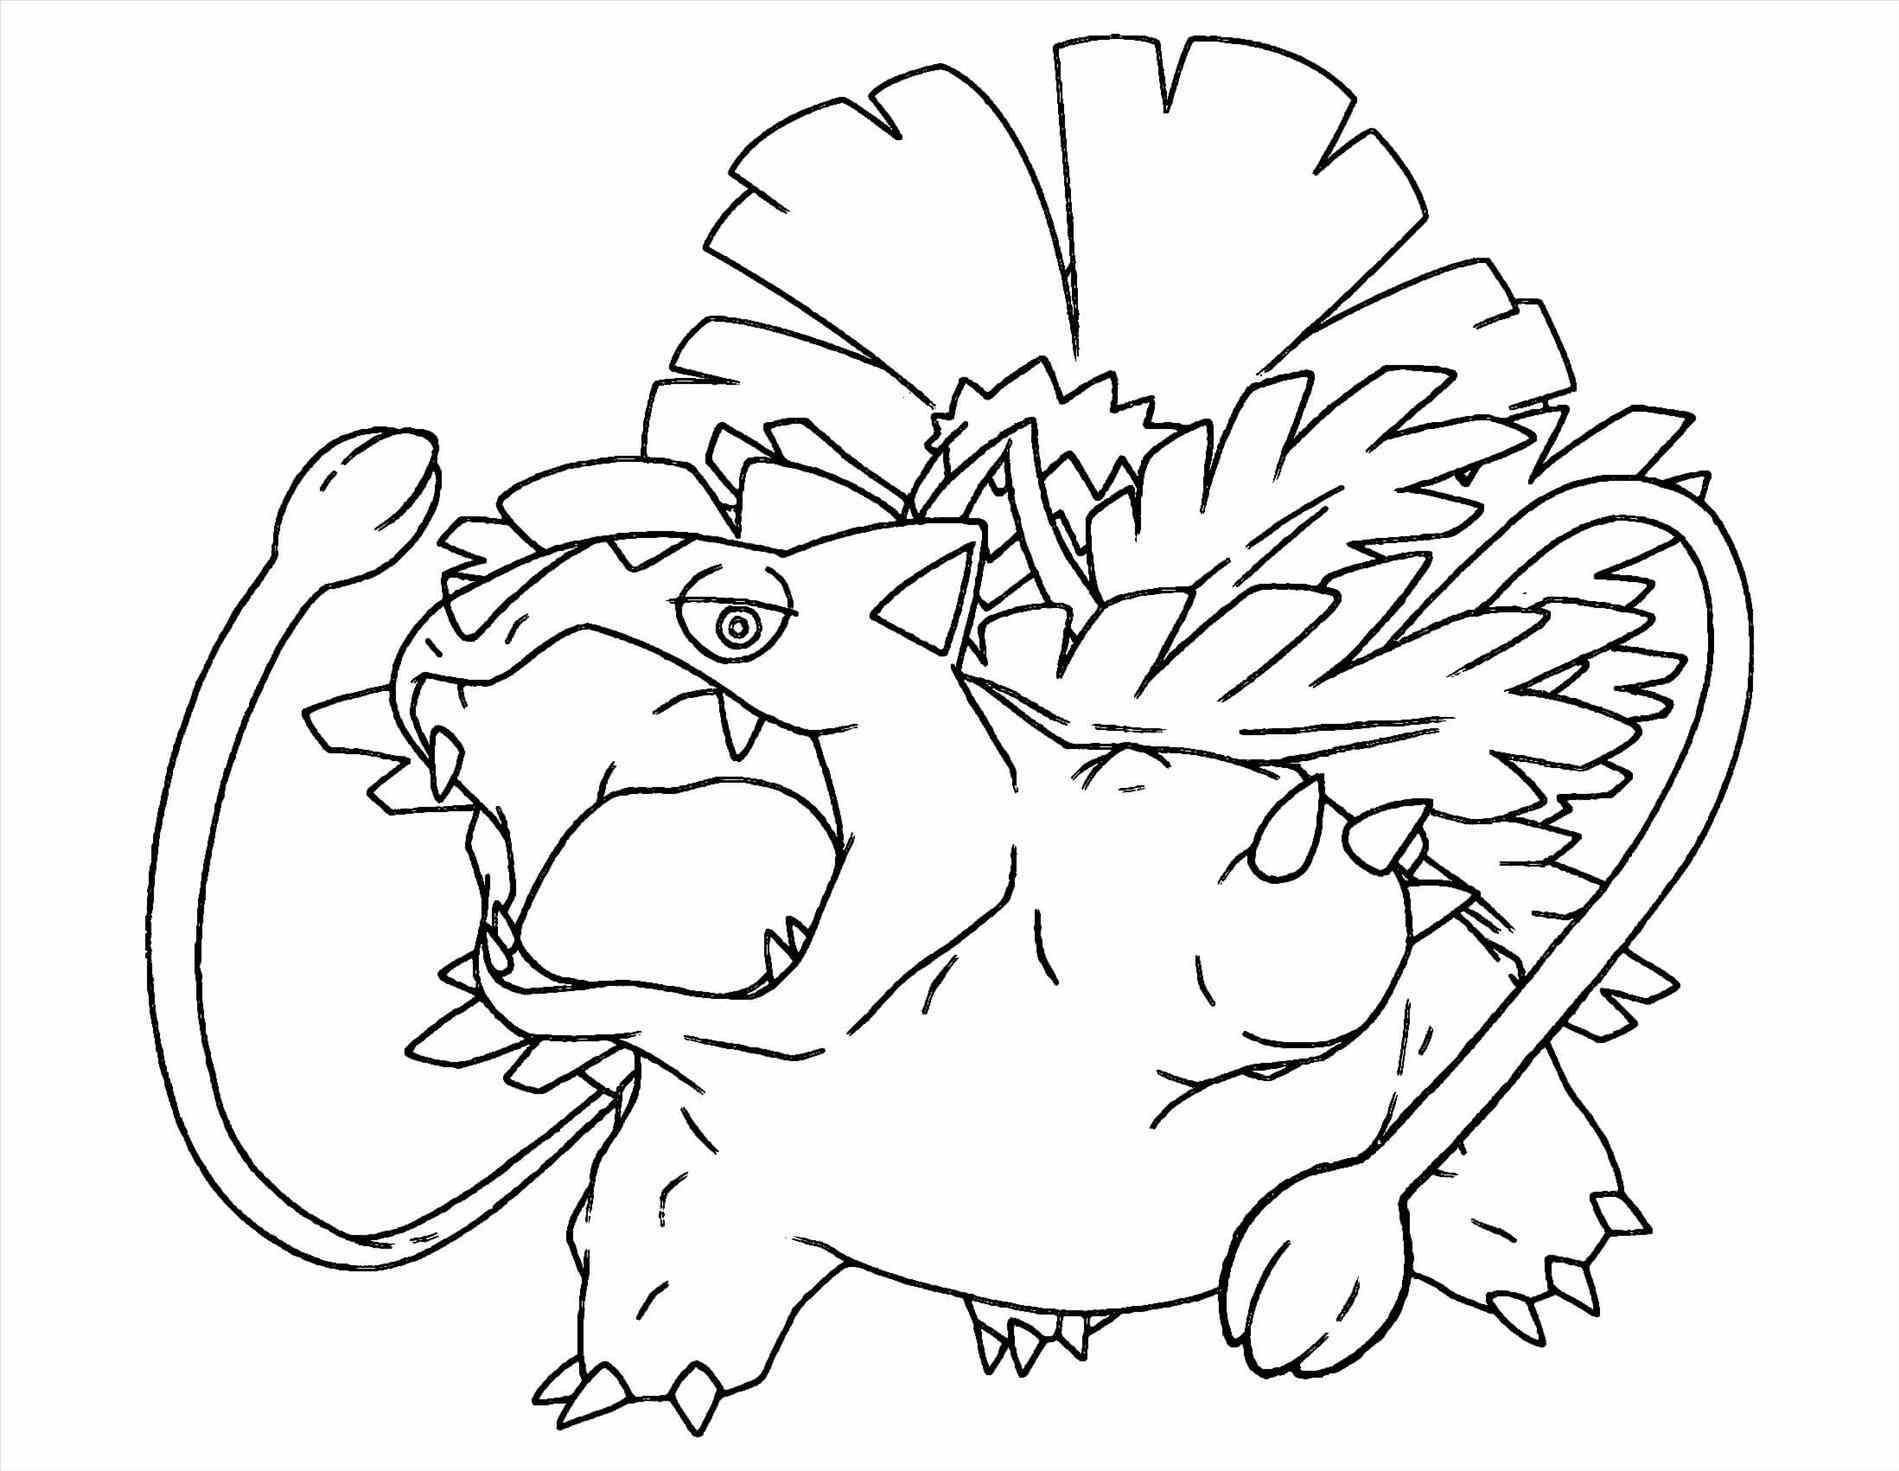 Charmeleon Coloring Page at GetColorings.com | Free printable colorings